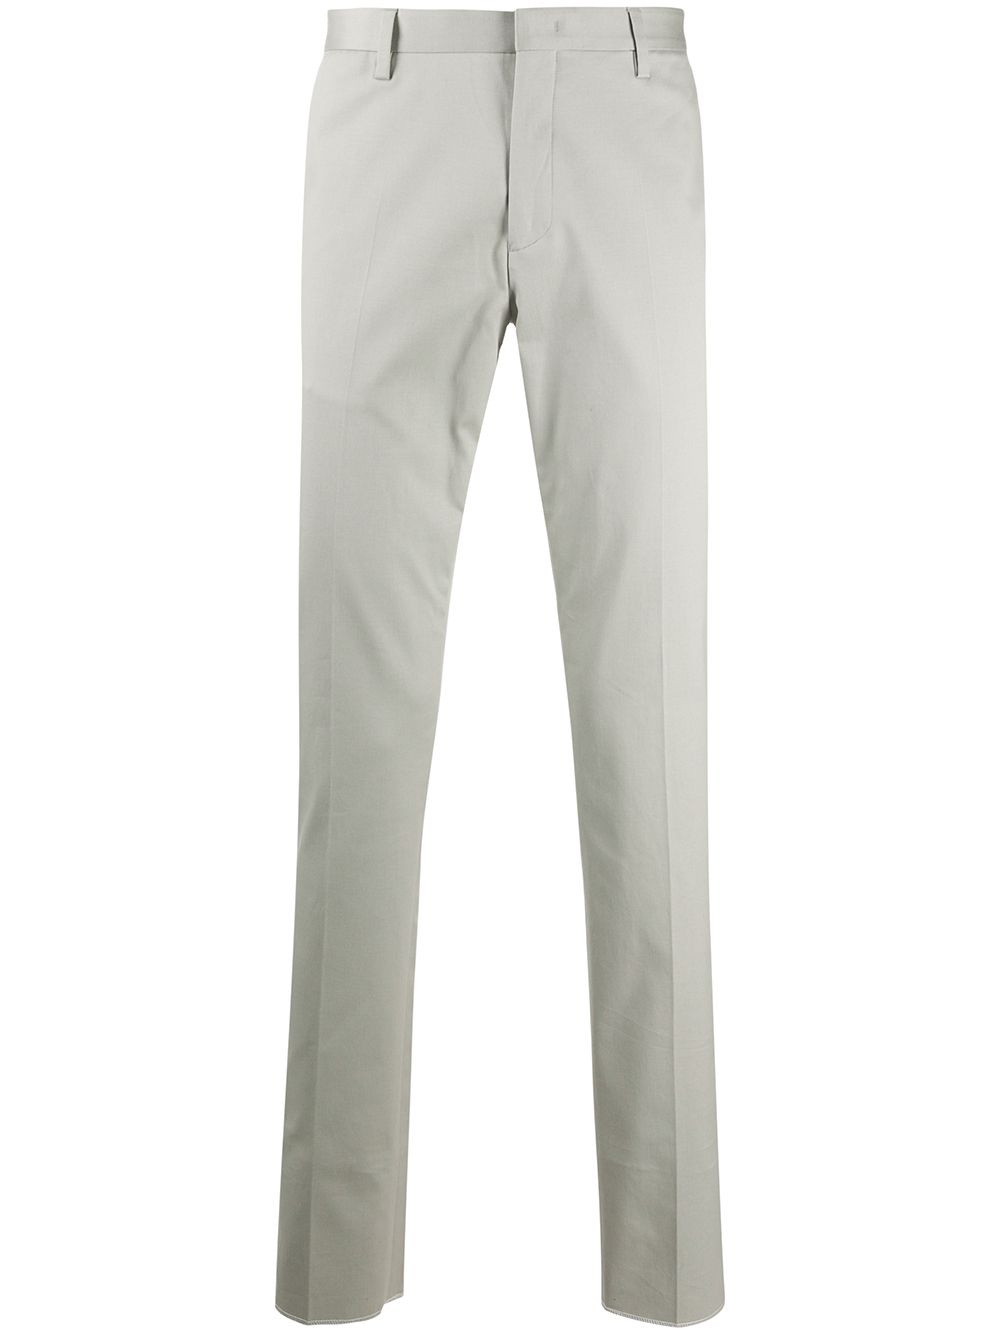 PAUL SMITH TAILORED STRAIGHT LEG TROUSERS